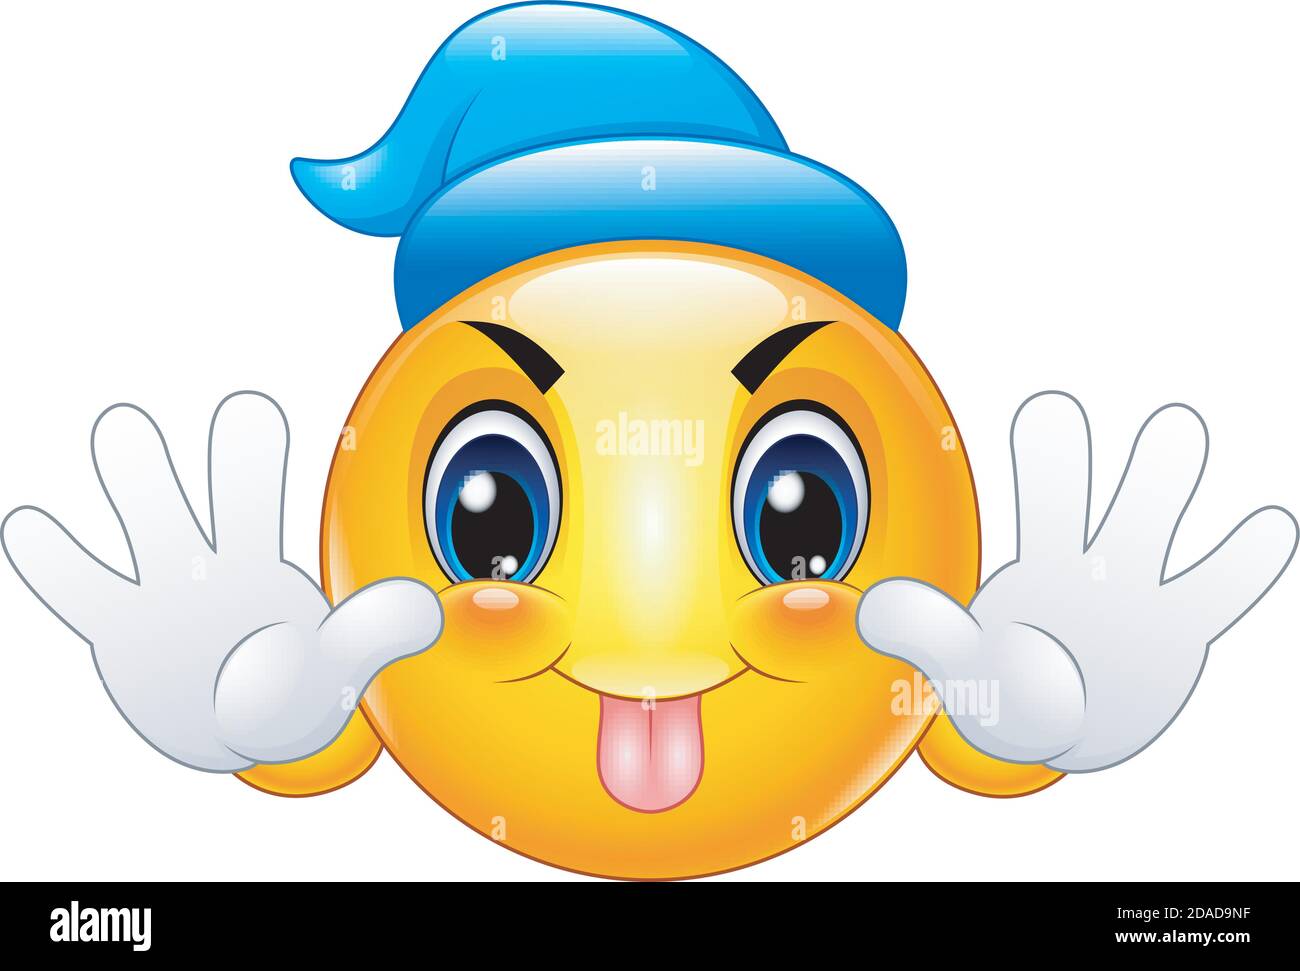 Vector illustration of Cartoon emoticon sticking out his tongue Stock Vector